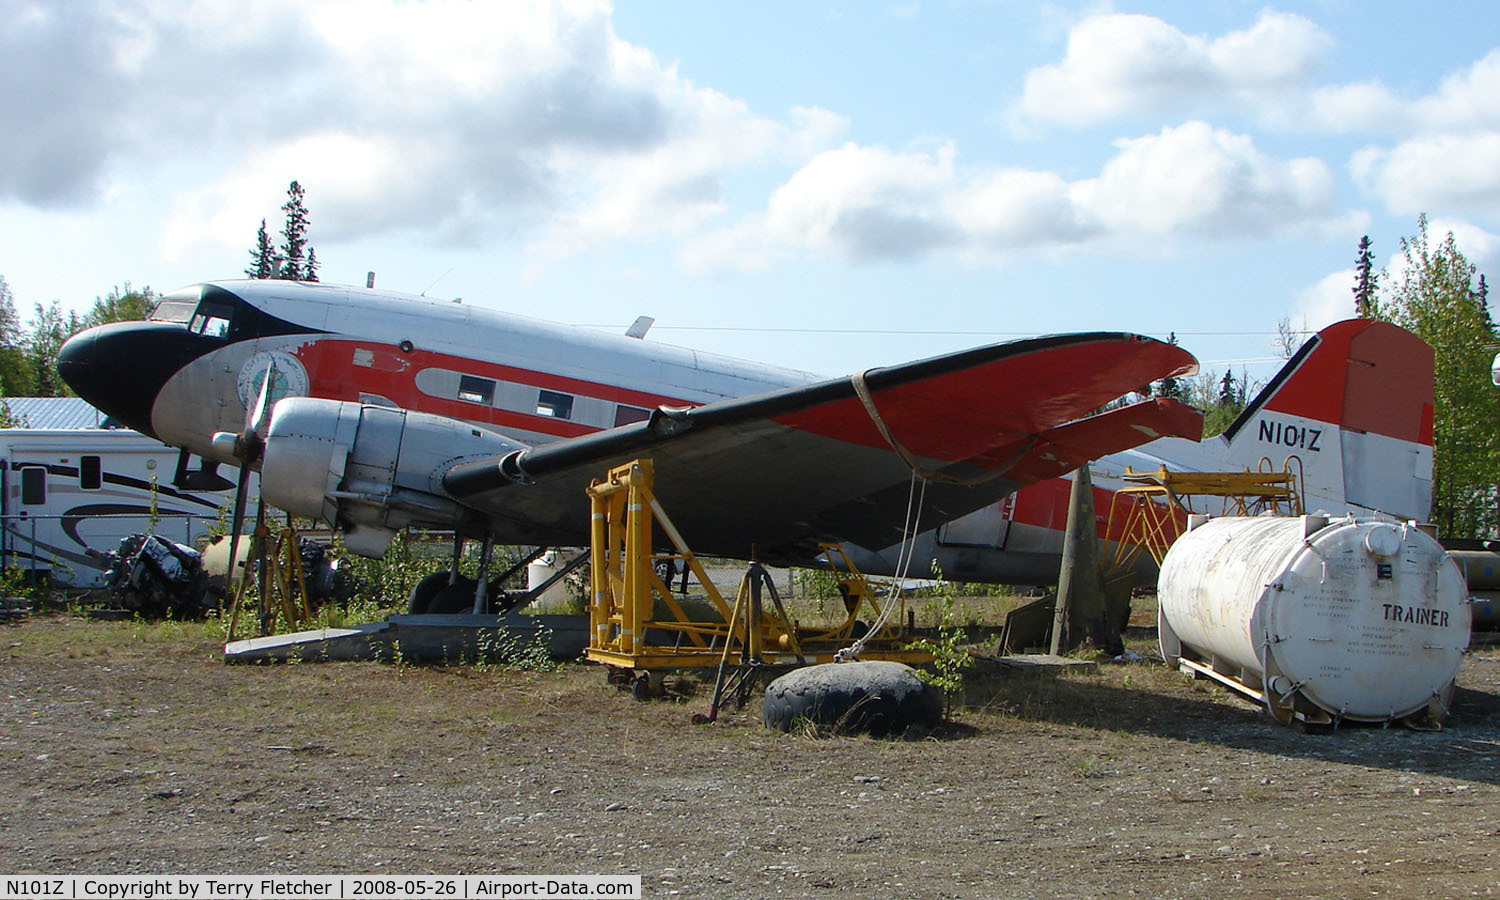 N101Z, 1942 Douglas DC3C 1830-94 C/N 4574, This Douglas DC3 previously operated as 41-18482 and then as N99 with the FAA - it now sits at the Wasilla Transport Museum in Alaska